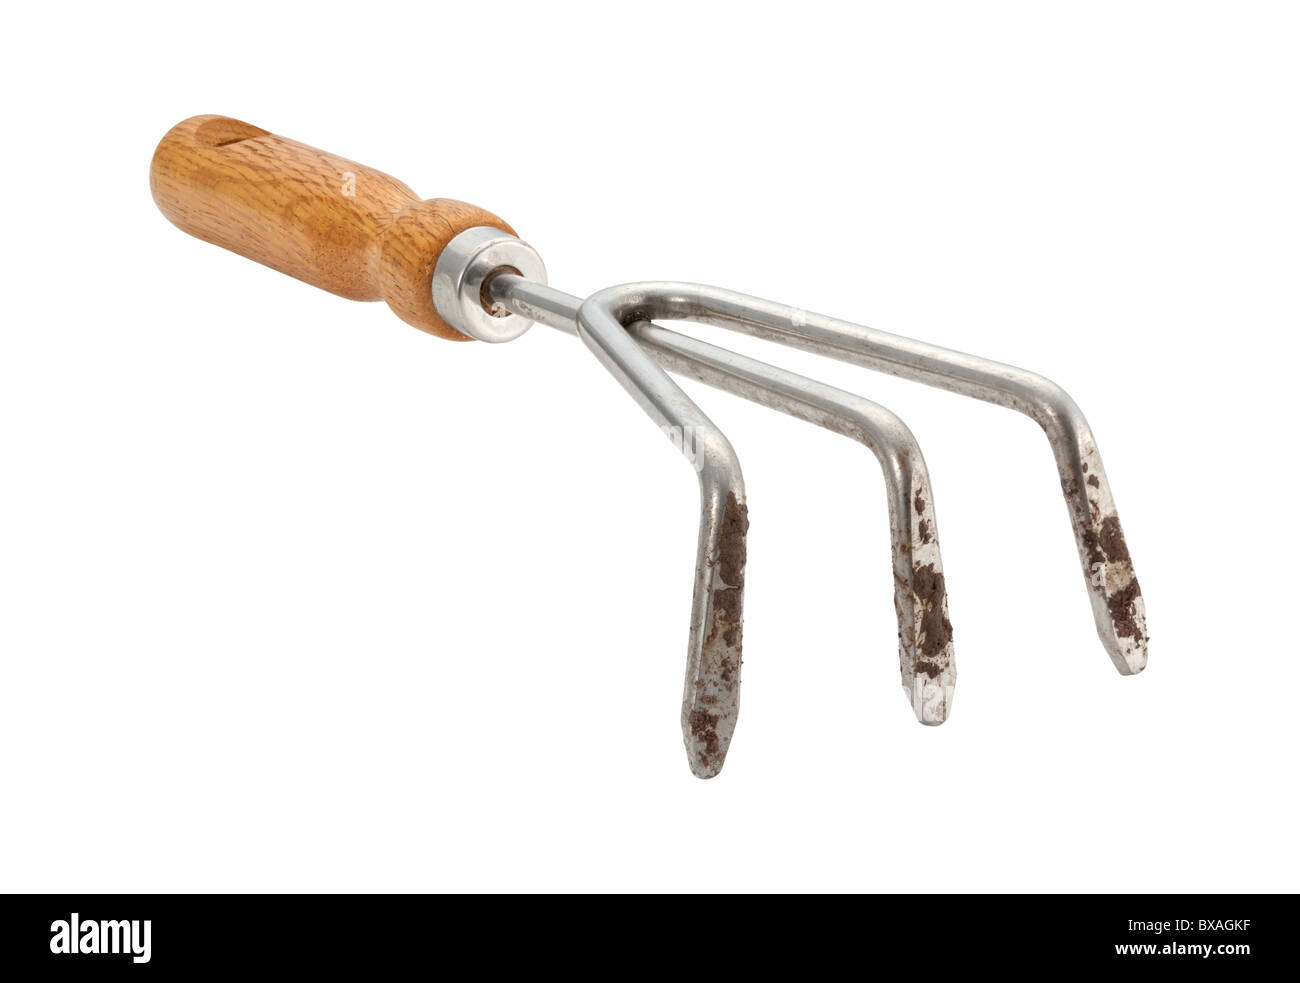 Garden Claw Cultivator isolated on a white background. Stock Photo